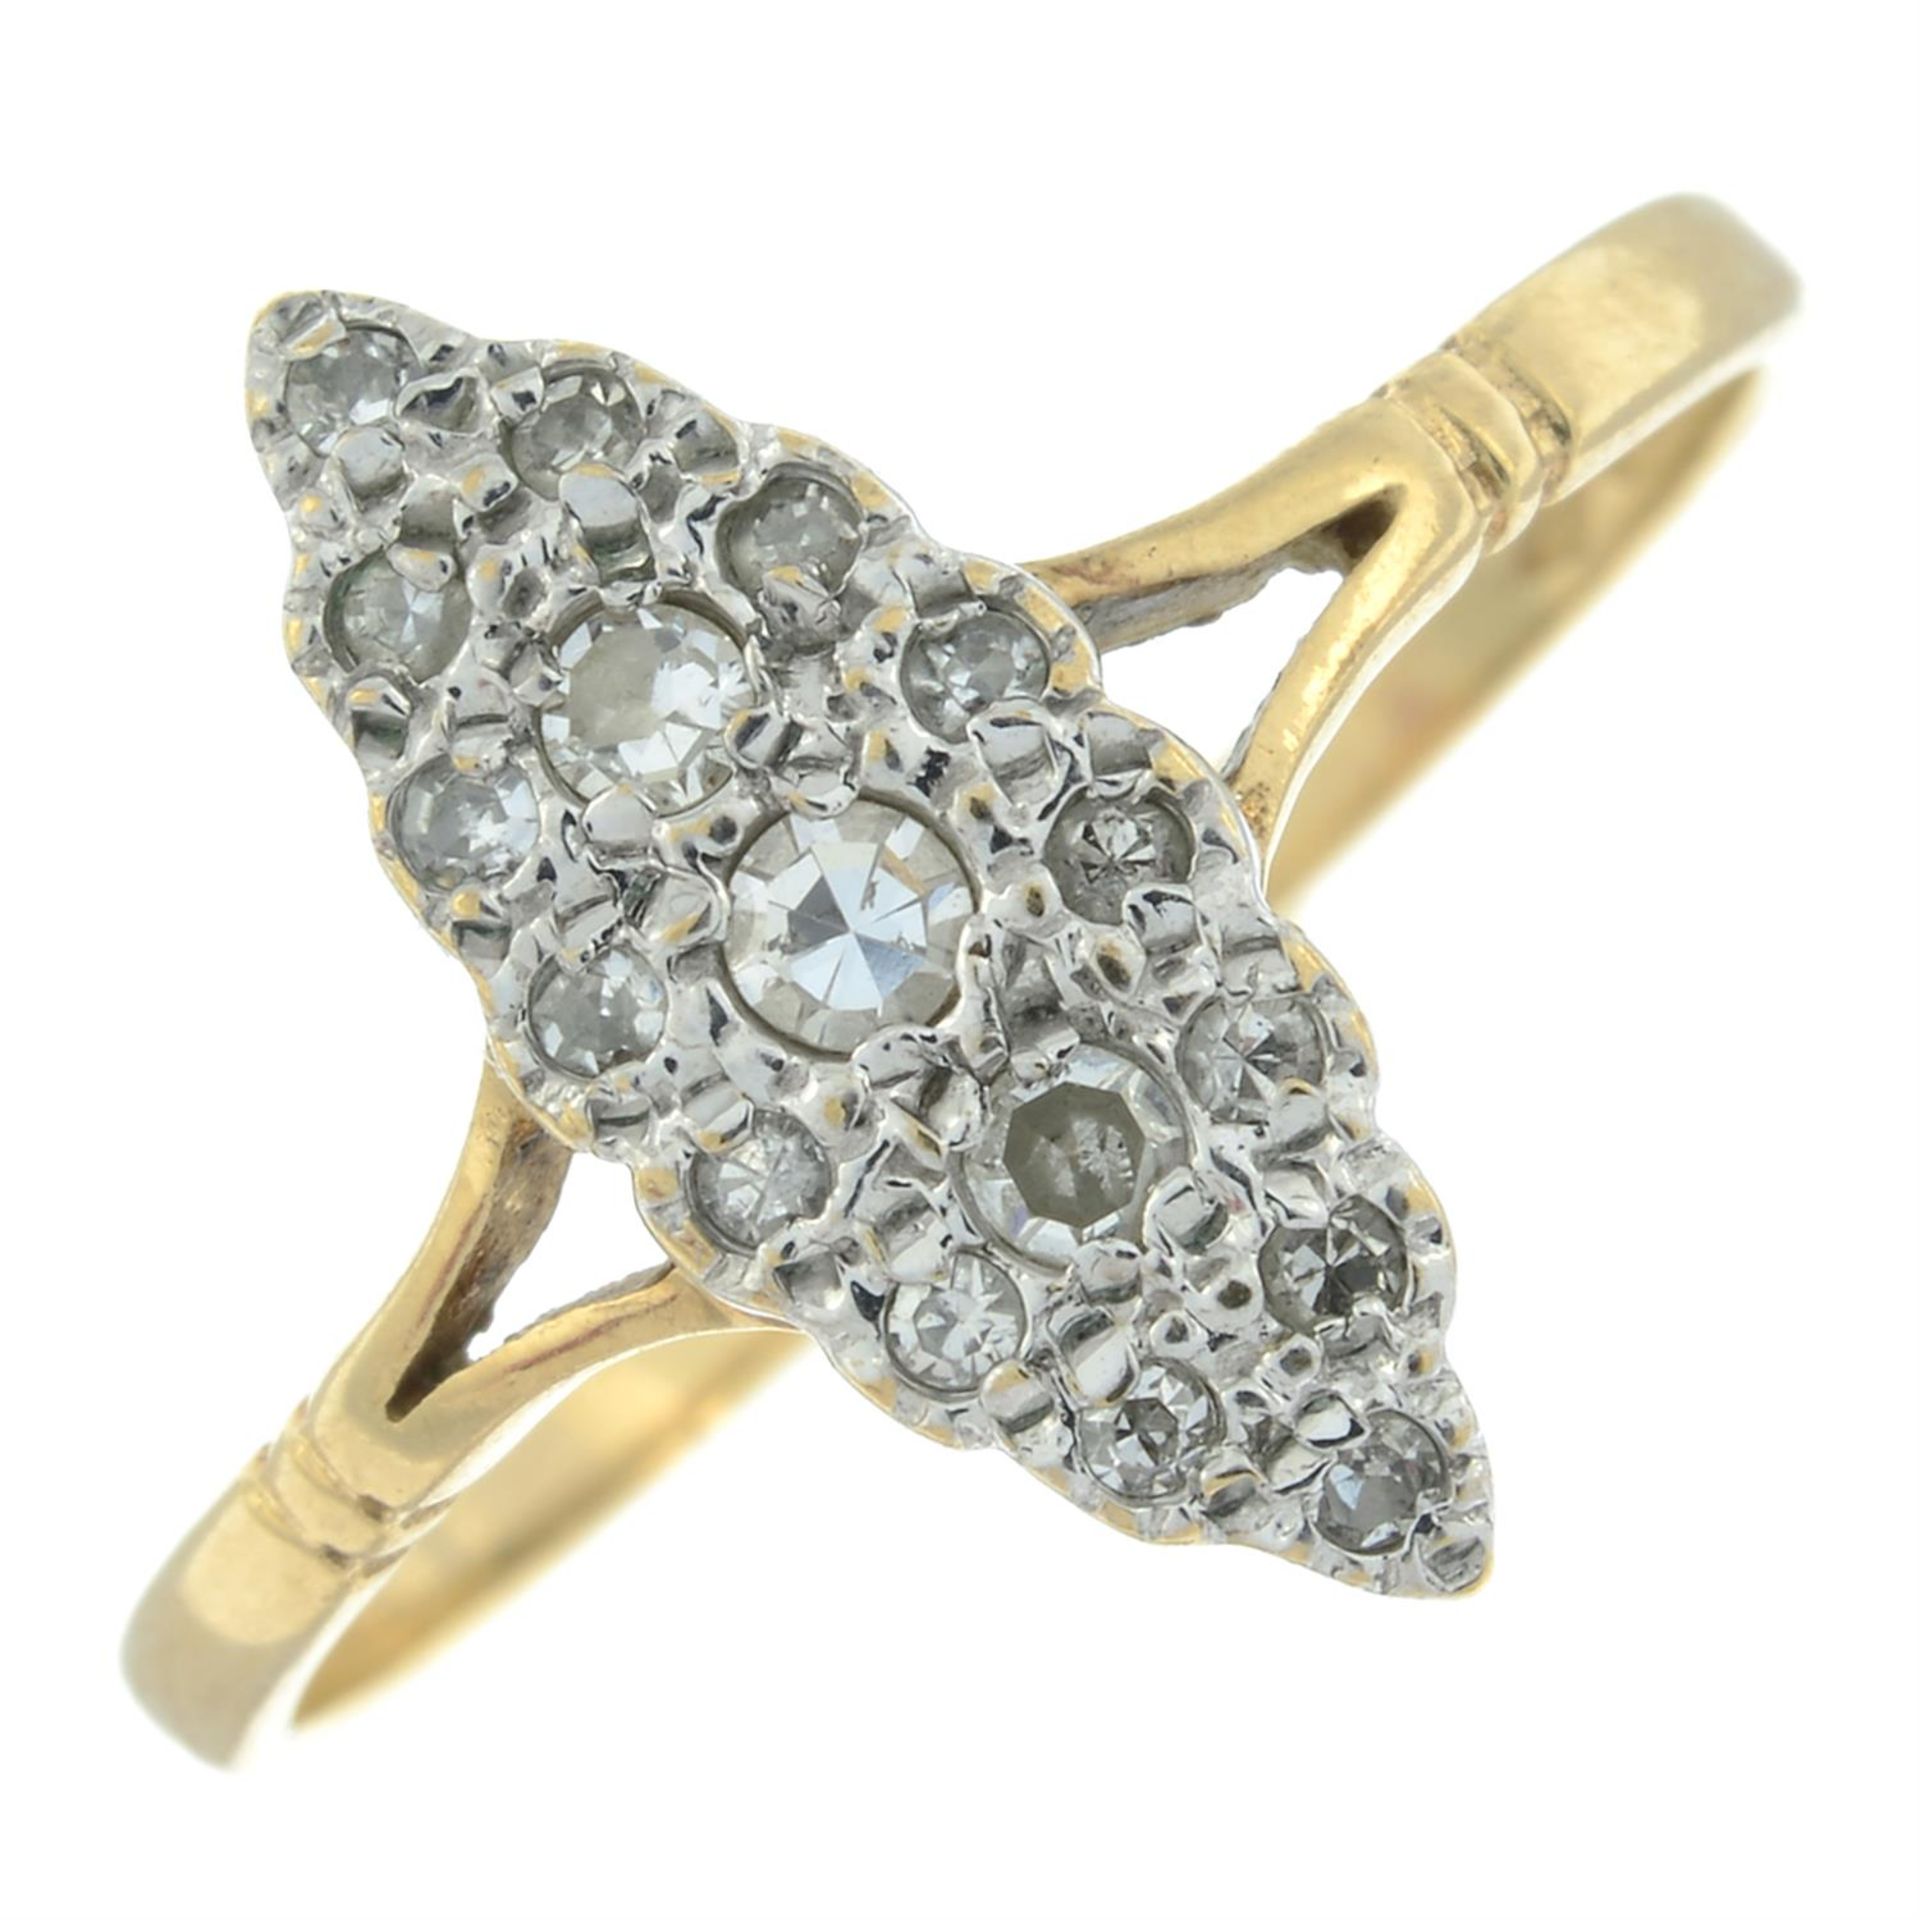 A 9ct gold diamond navette-shape cluster ring.